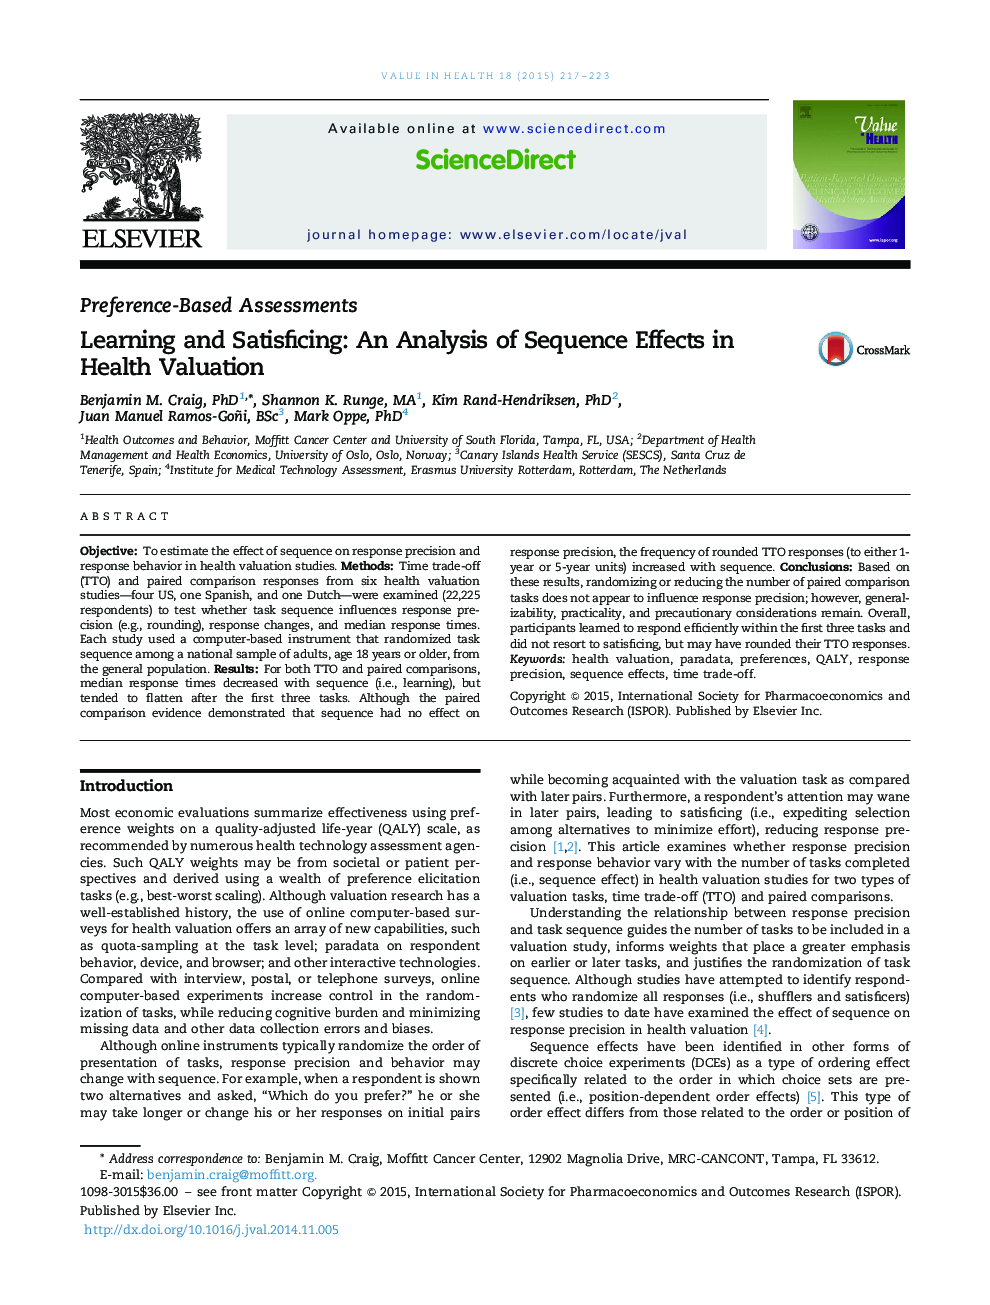 Learning and Satisficing: An Analysis of Sequence Effects in Health Valuation